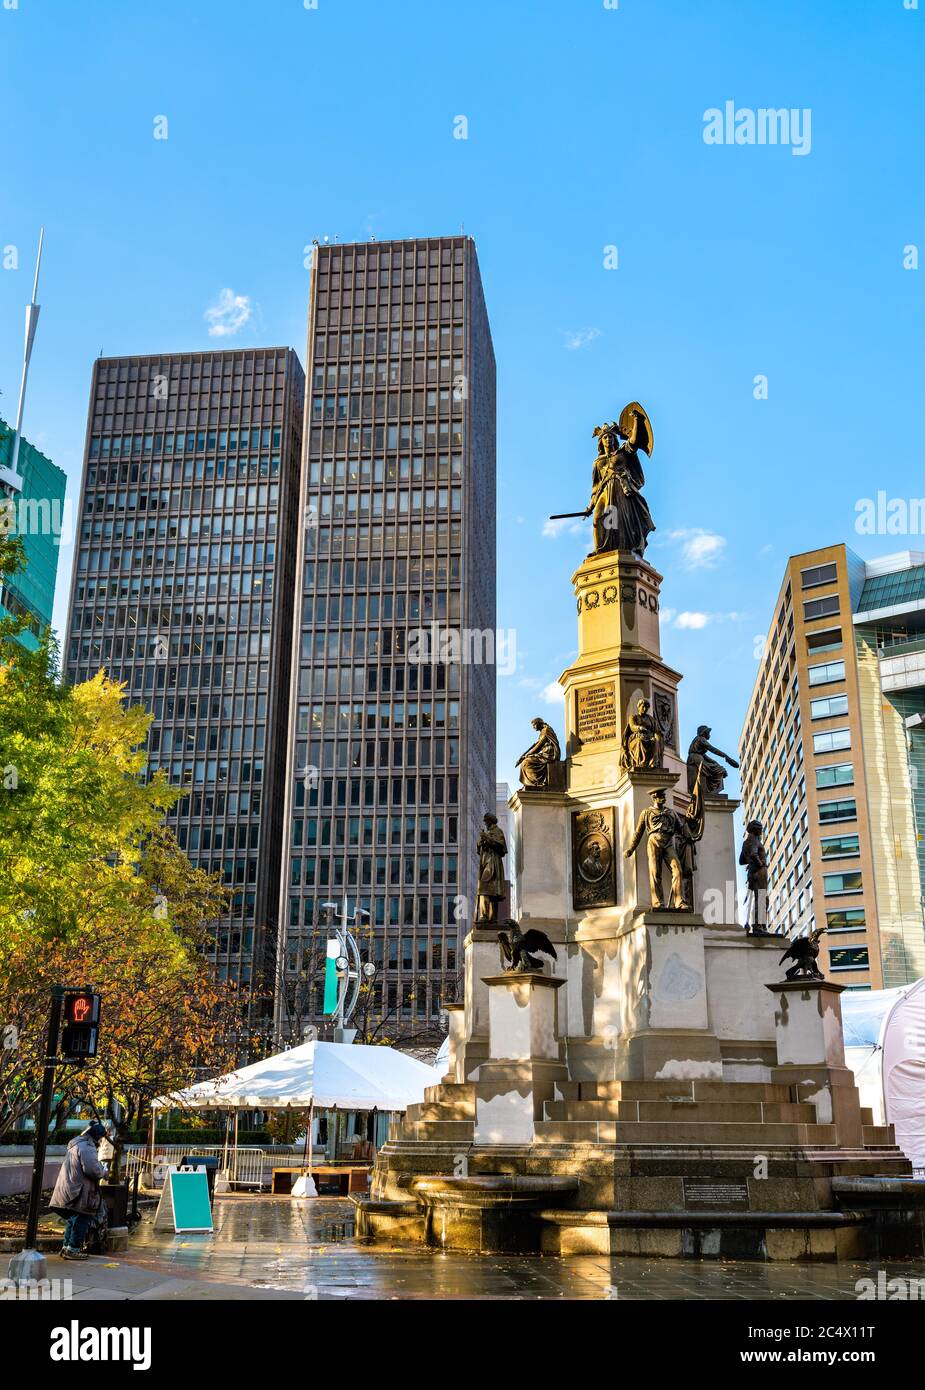 Soldiers and Seemanns Monument in Detroit, Michigan Stockfoto